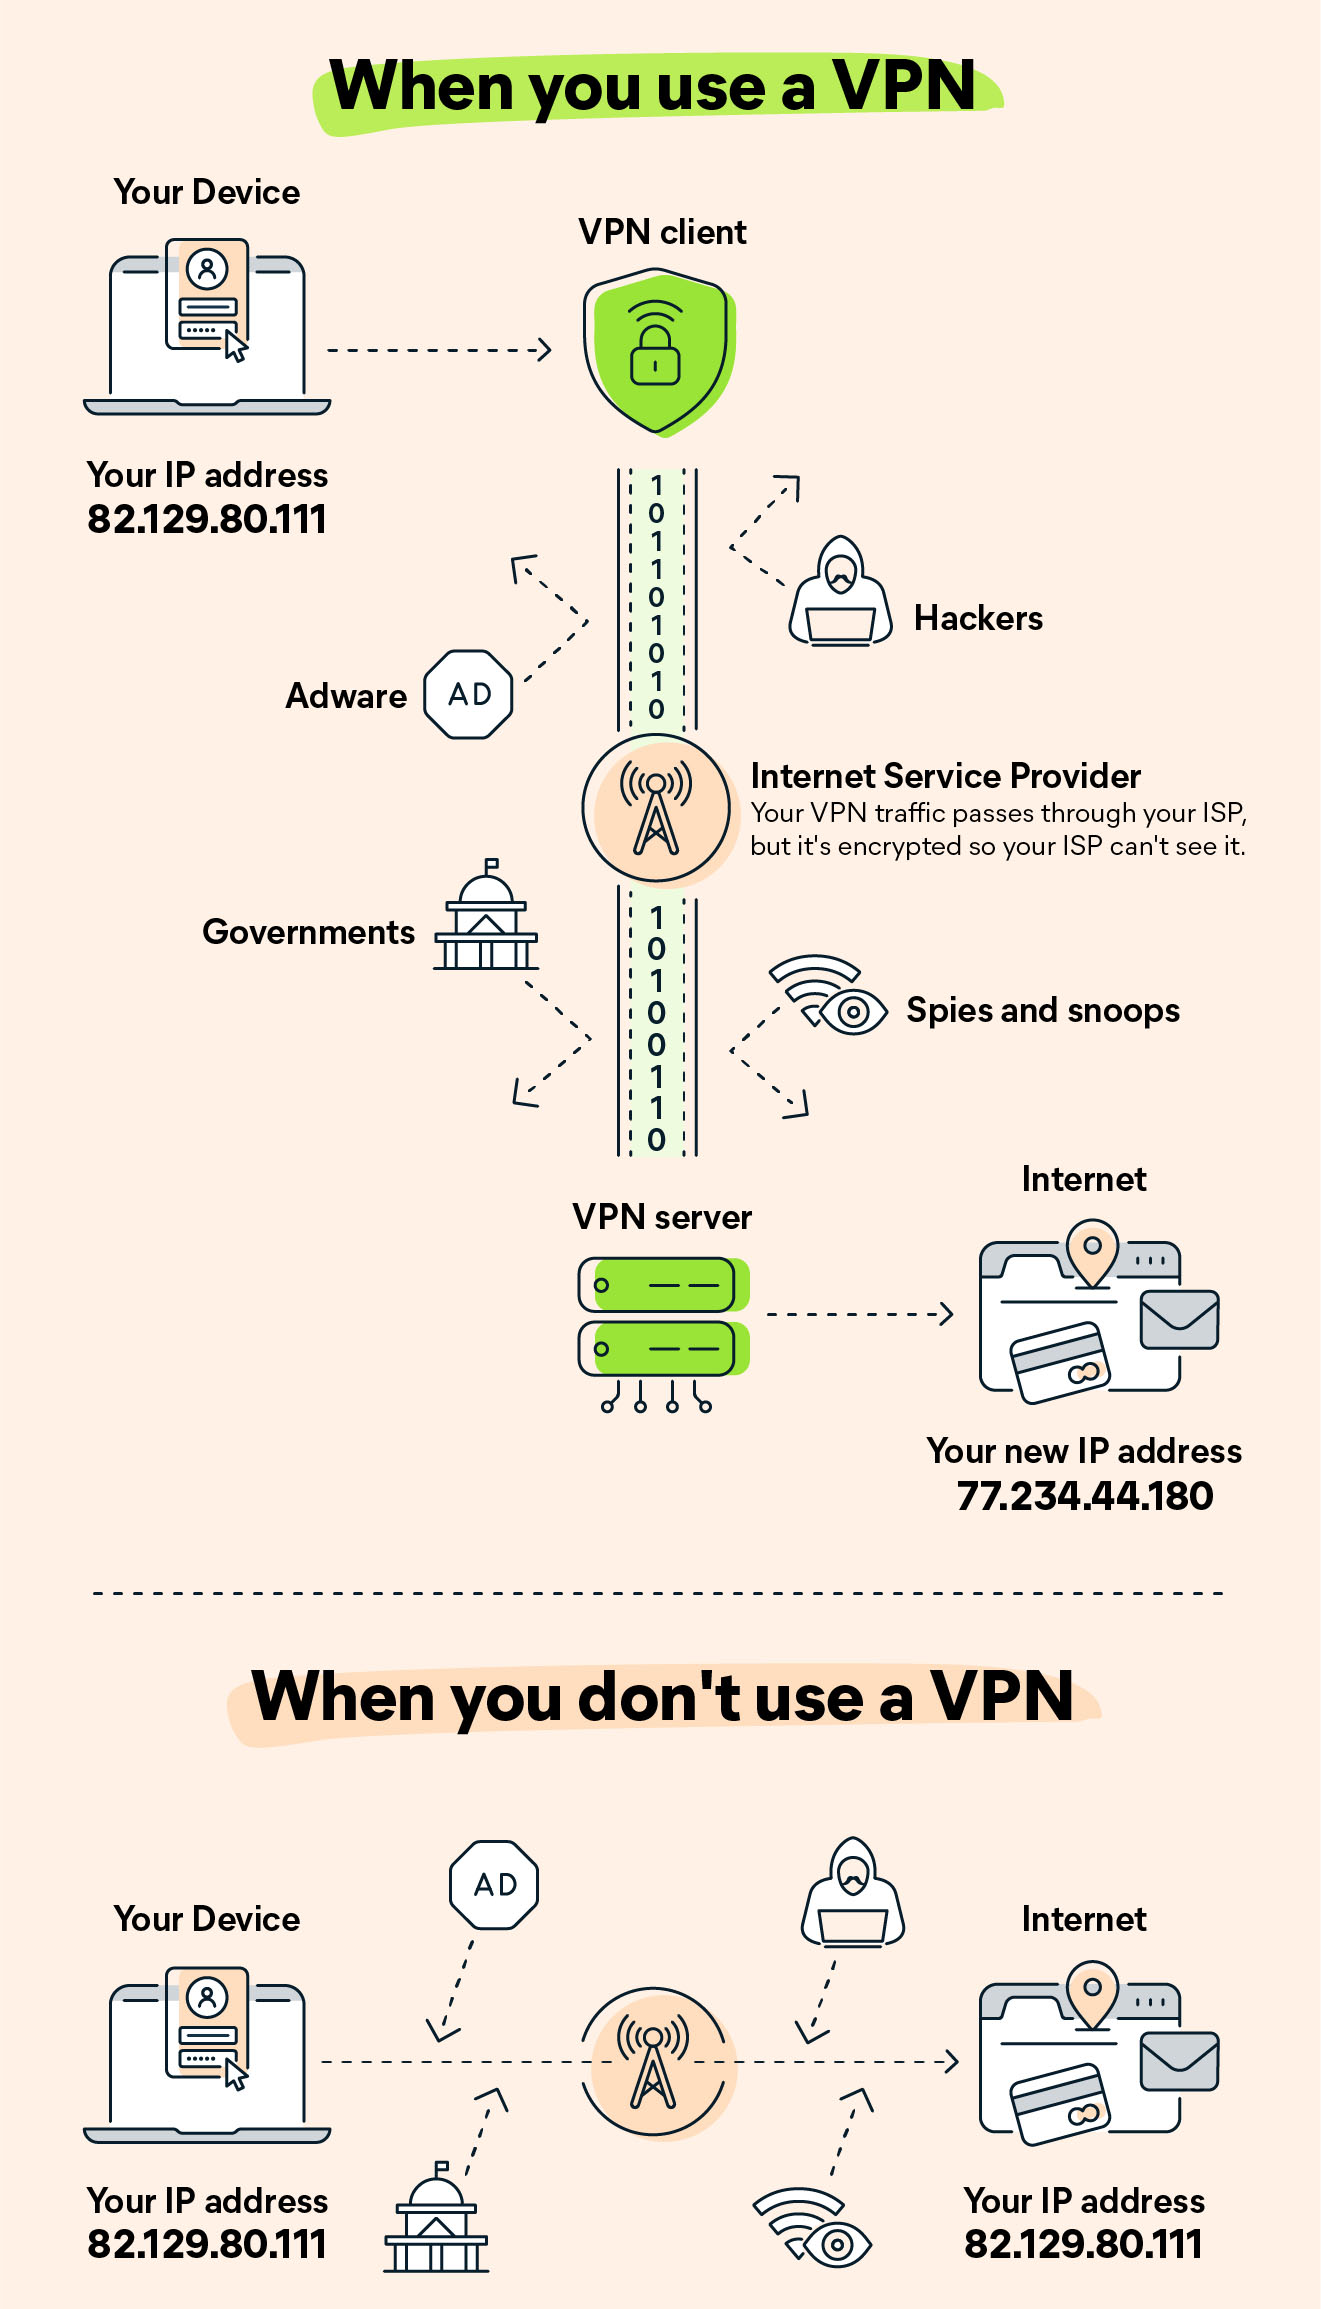 Illustration of using and don't using a virtual private network (VPN)